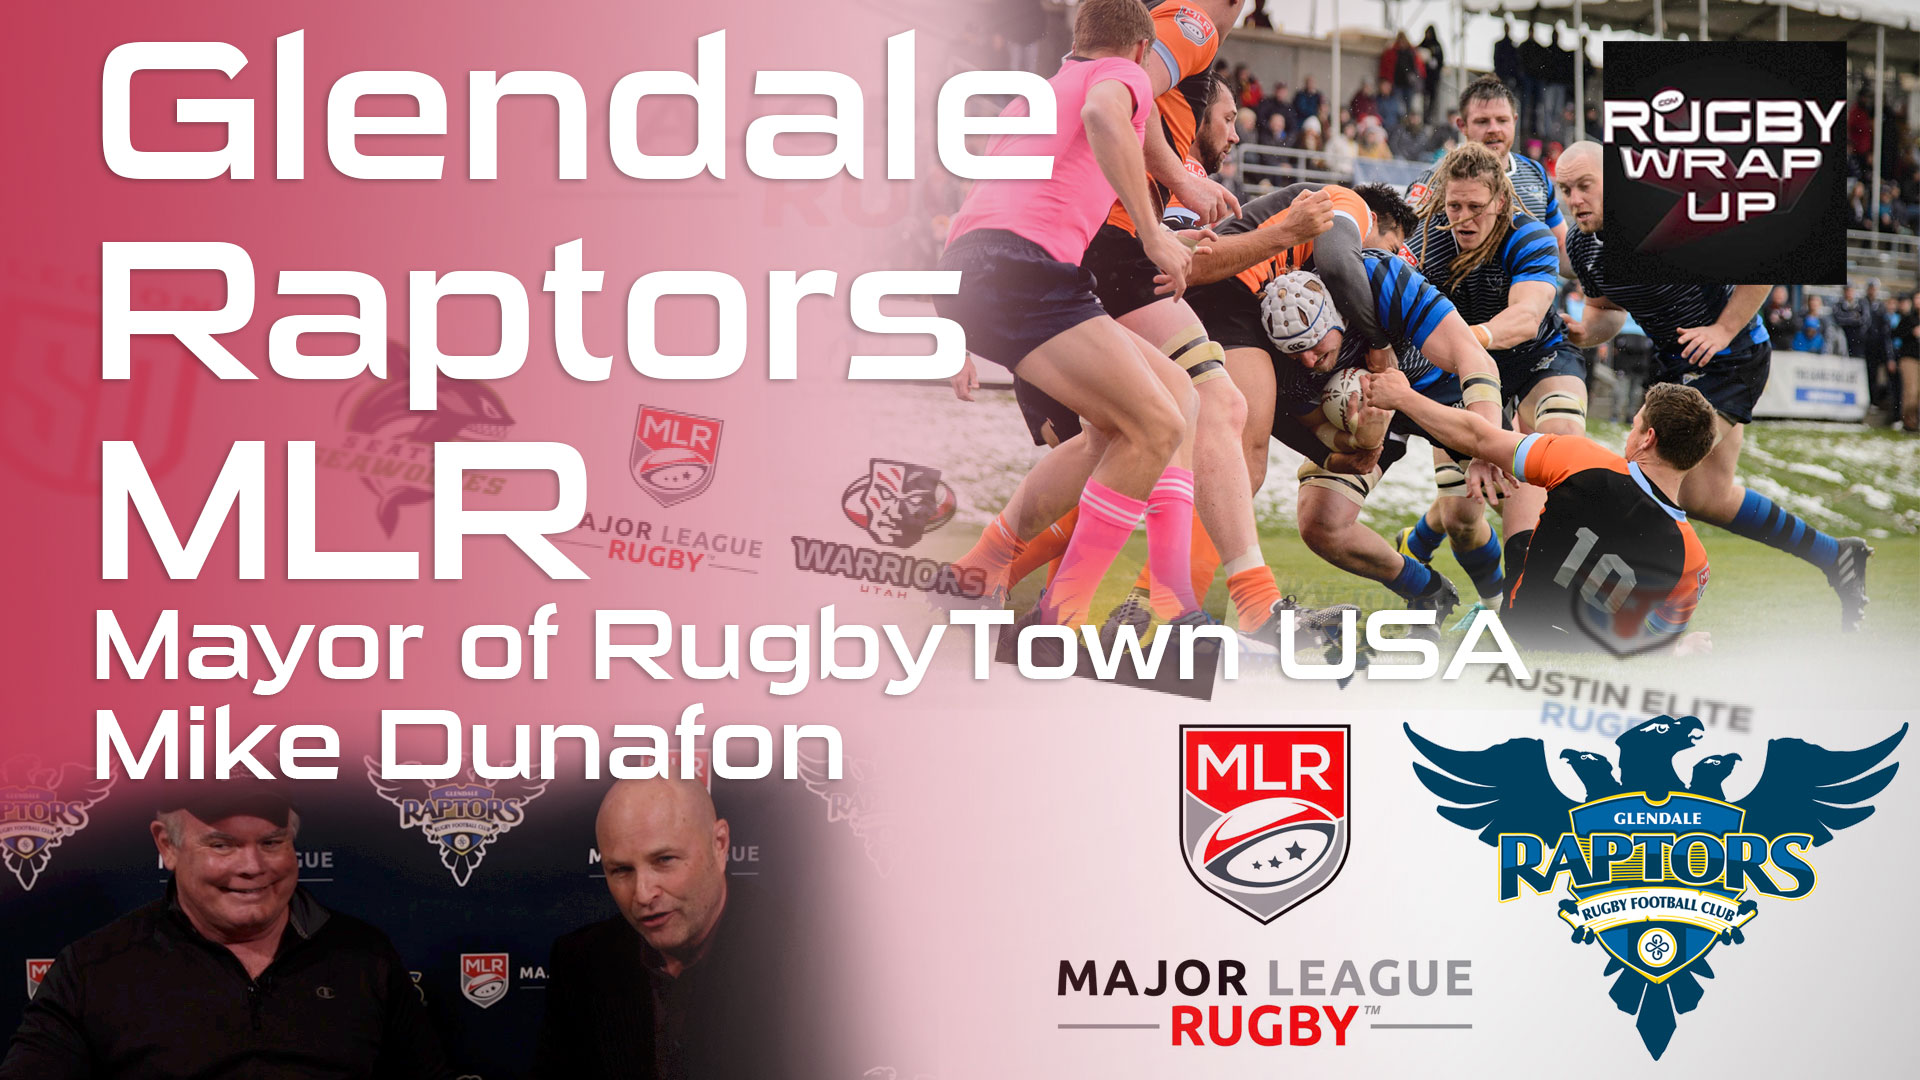 Rugby_Wrap_Up, Mayor-of-Rugby-Town-USA-Glendale-Raptors-Major-League-rugby